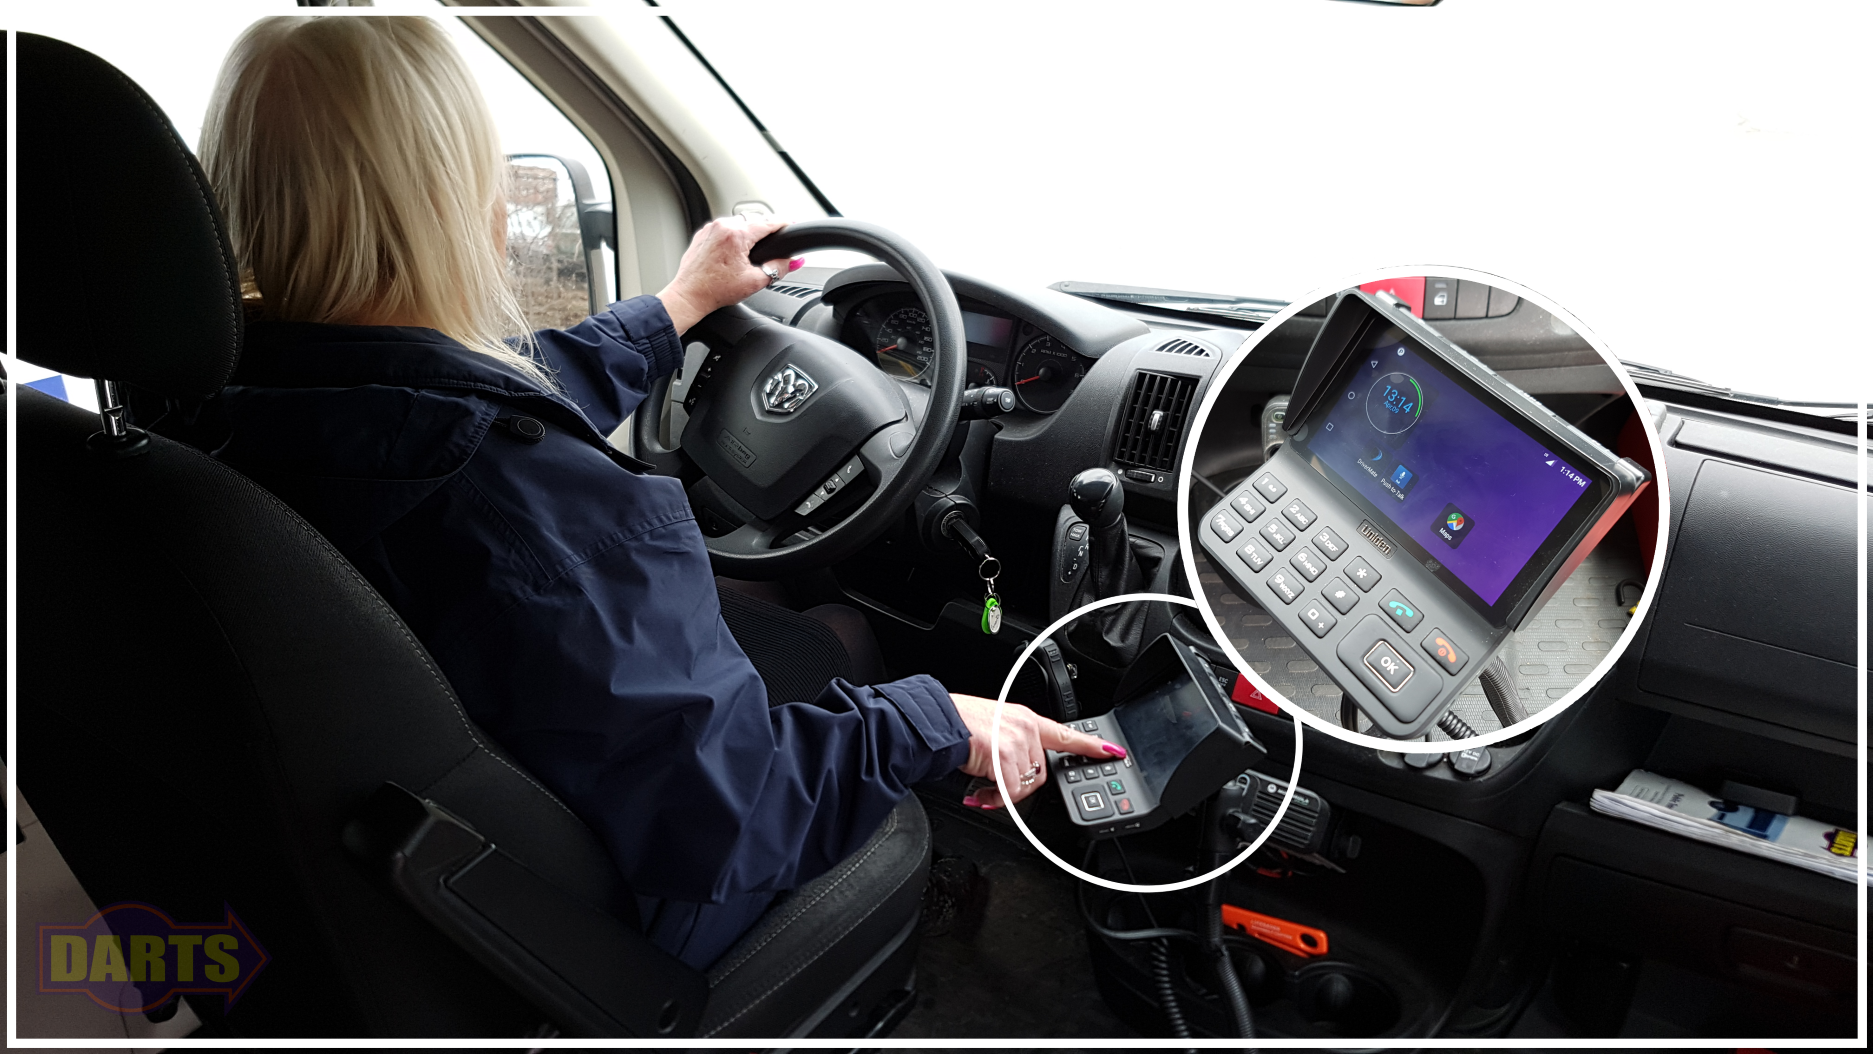 DARTS driver using ride management software in vehicle.